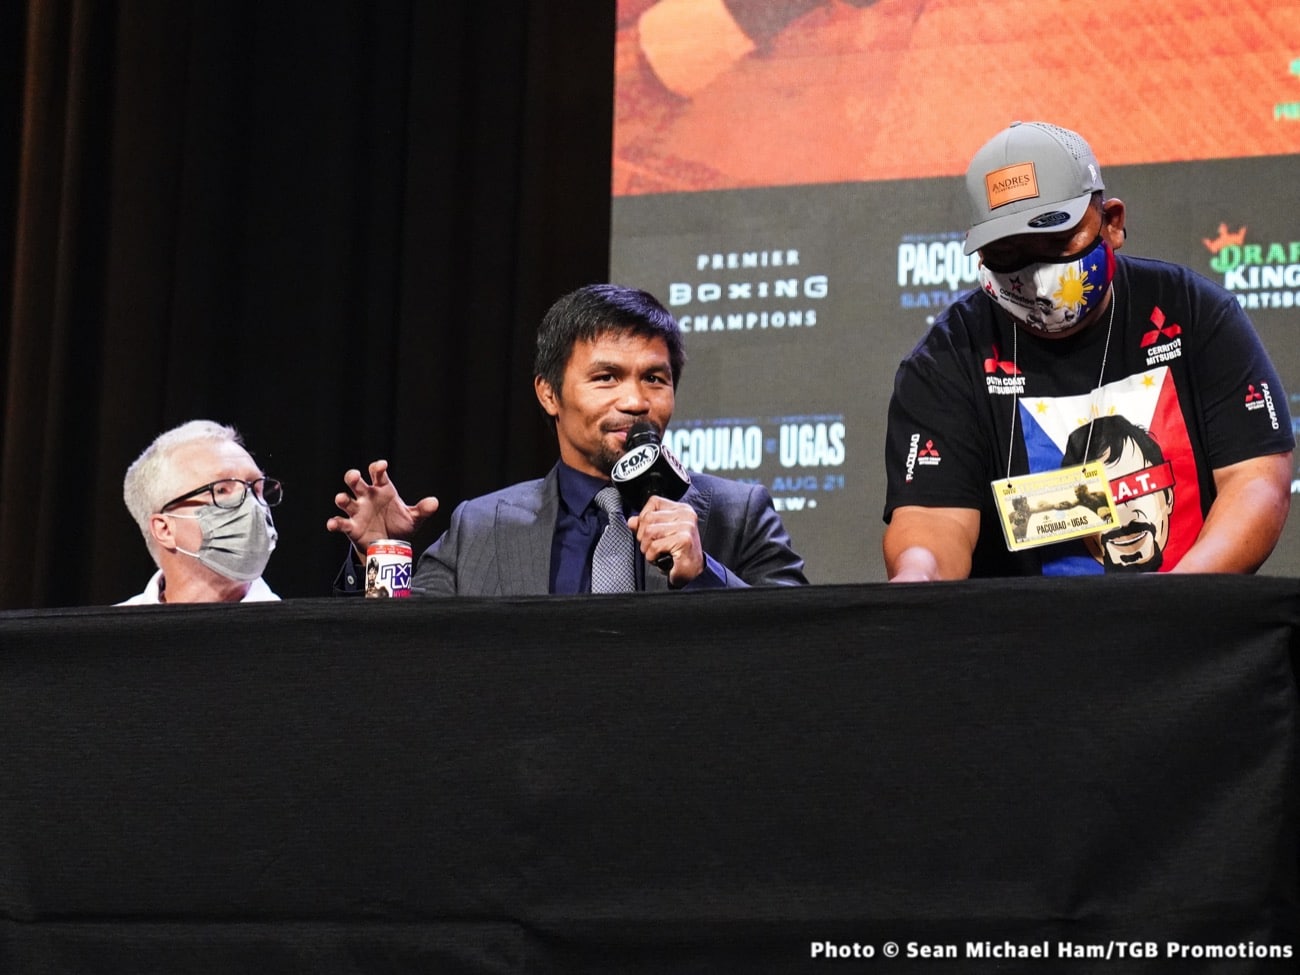 Manny Pacquiao, Floyd Mayweather Jr boxing photo and news image